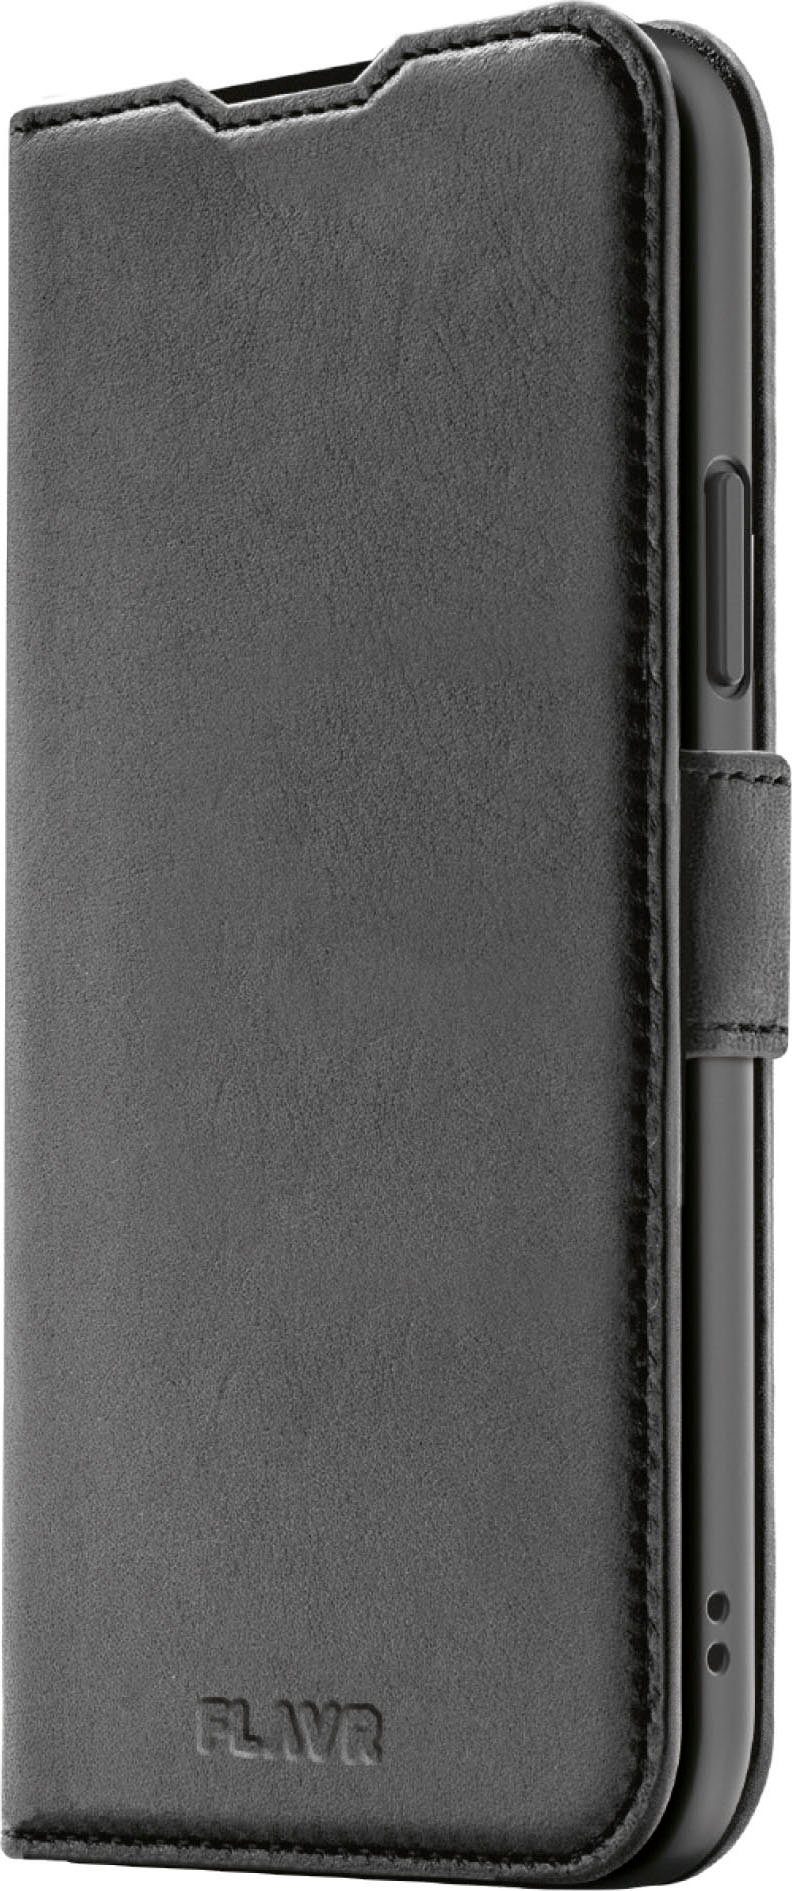 adidas Originals Backcover Wallet Leather Recycled FLAVR Case